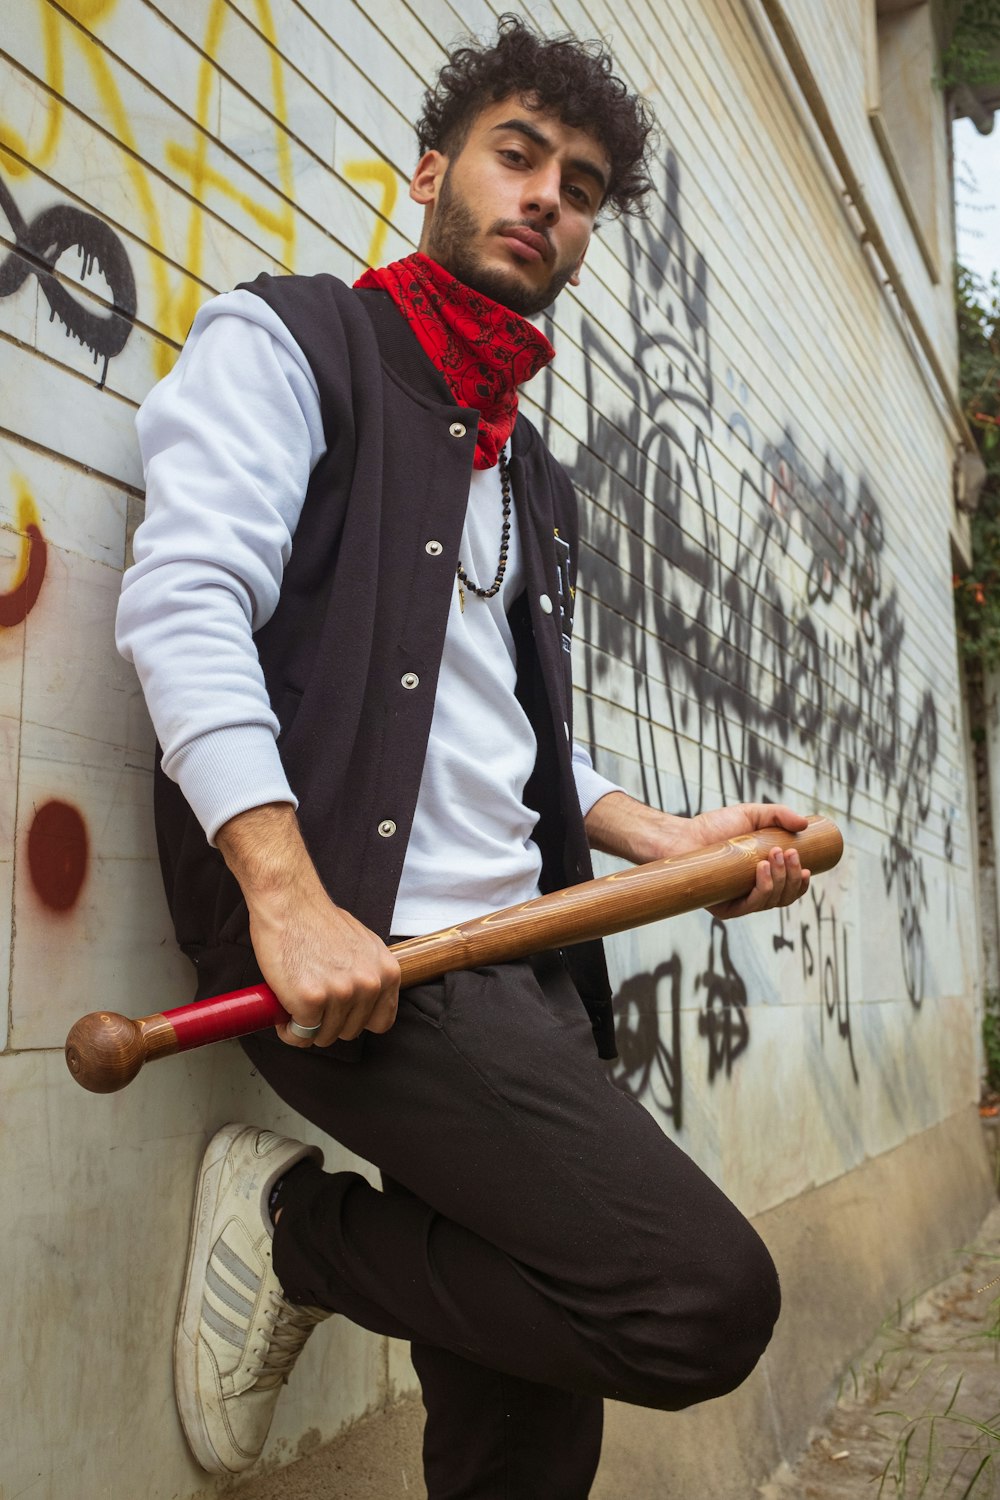 a man leaning against a wall with a baseball bat